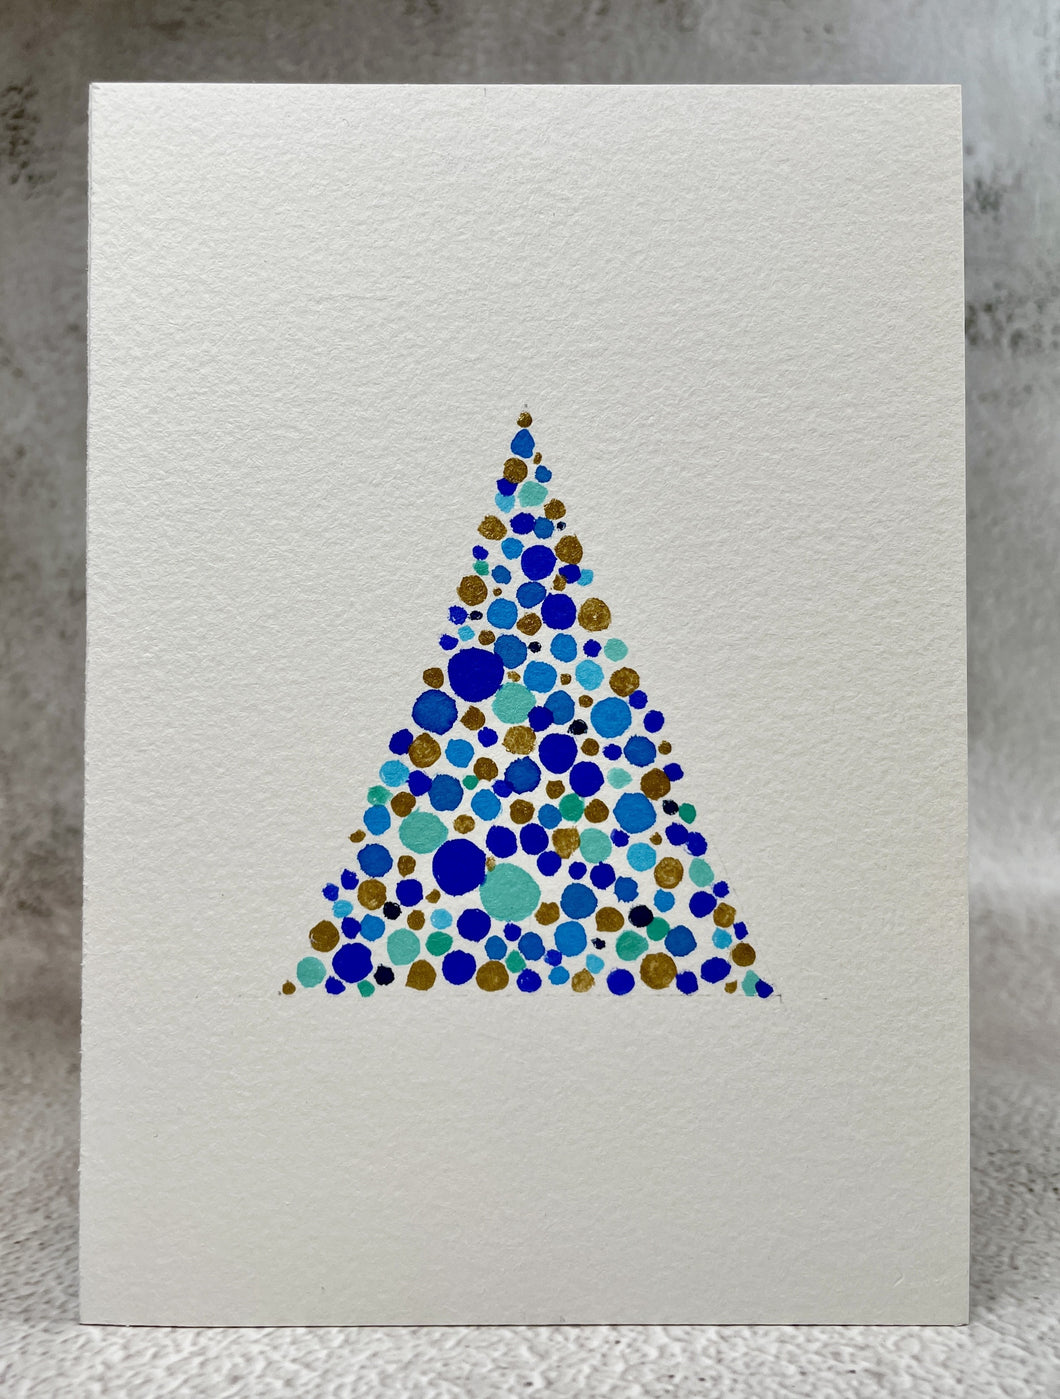 Abstract Teal, Blue, Turquoise and Gold Circles Christmas Tree - Handmade Christmas Card